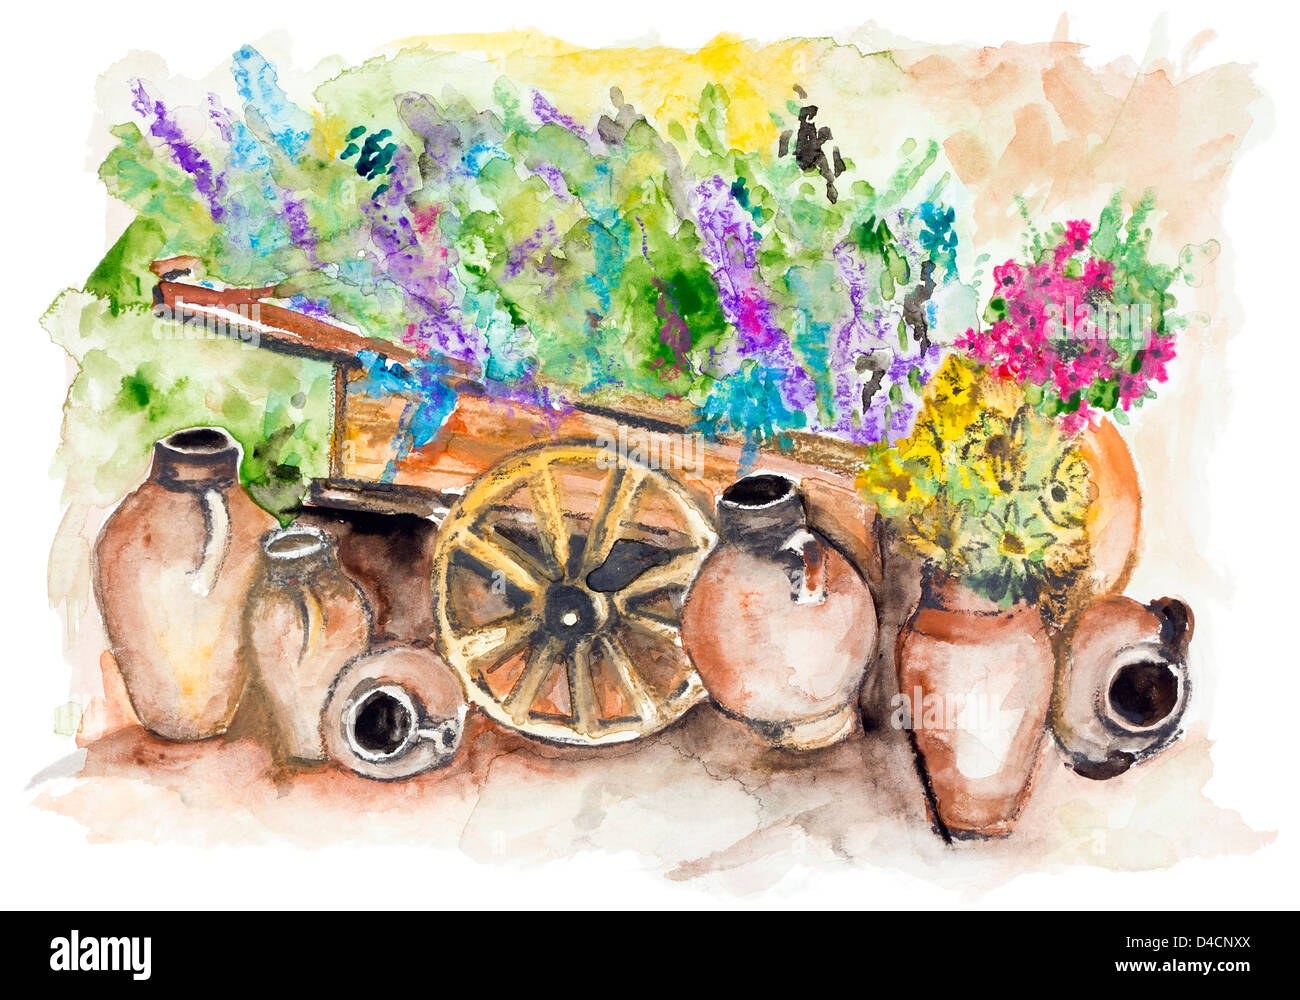 The rural wooden cart with lavender bunches of flowers, a lot of big clay jugs with sunflowers- handmade watercolor painting Stock Photo